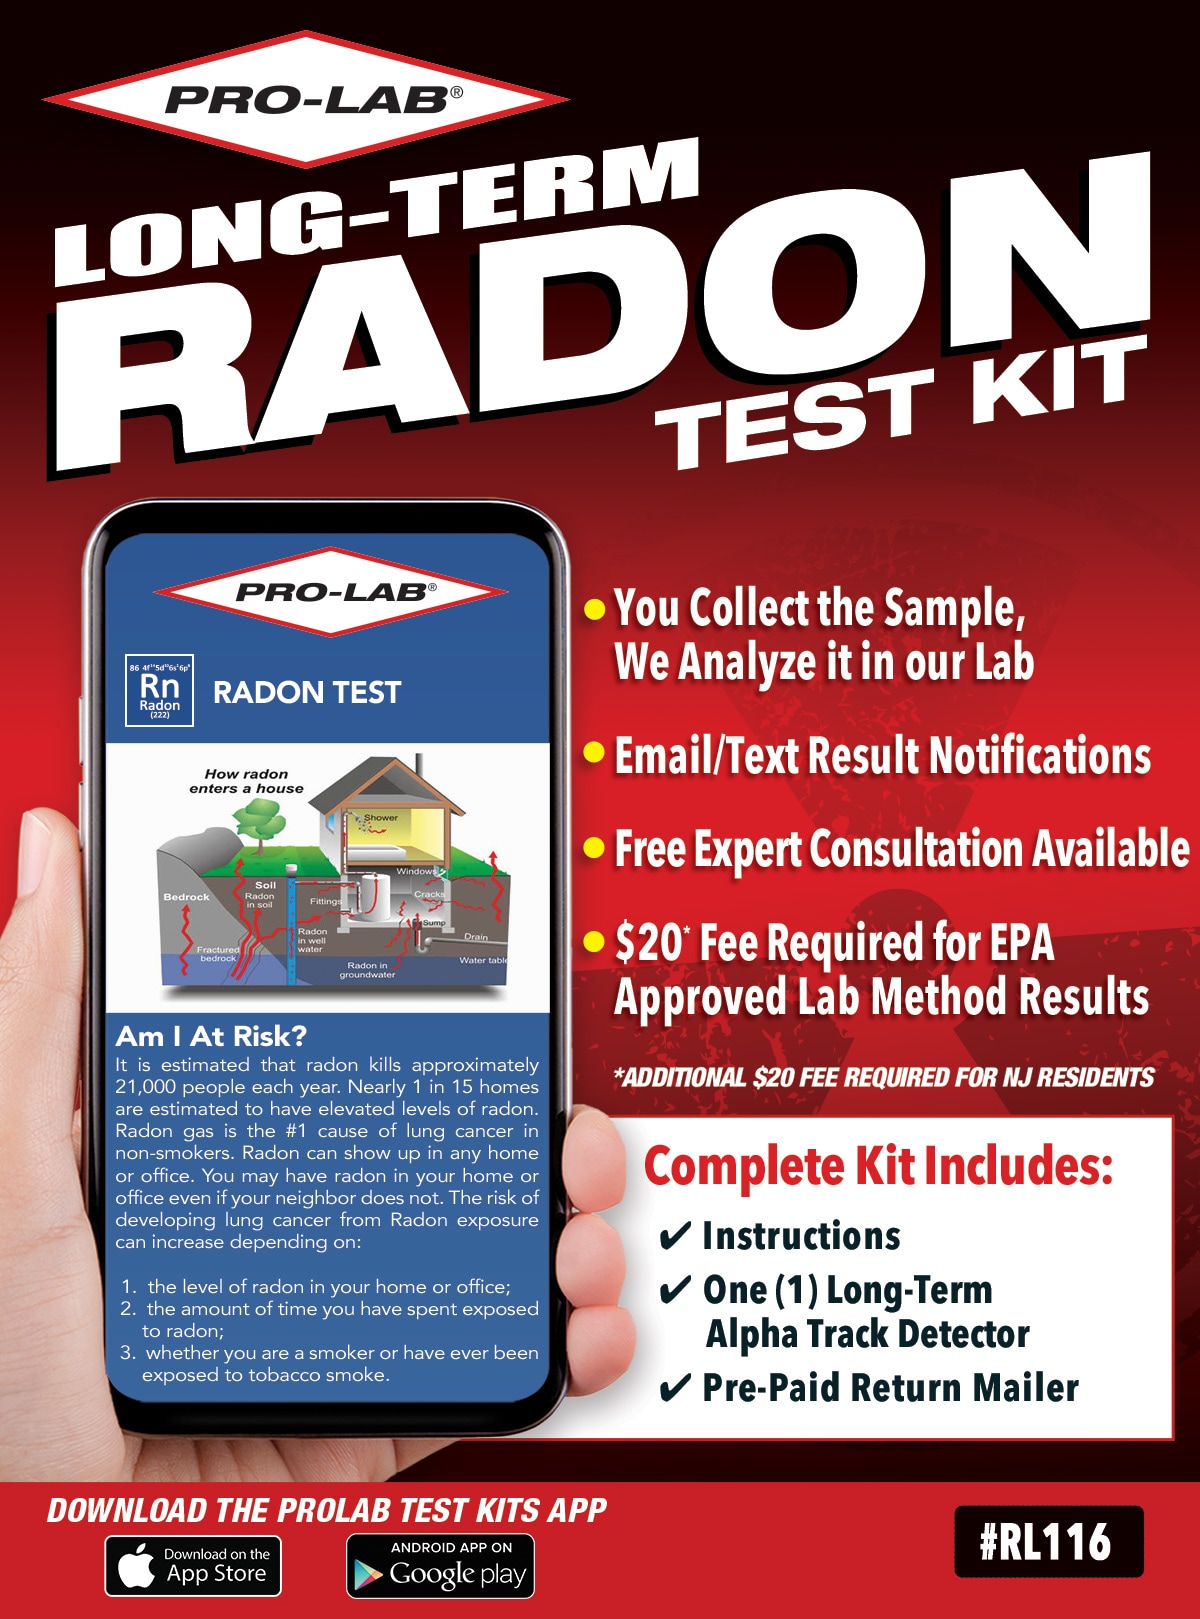 Handy Wholesale radon Available At Amazing Prices 